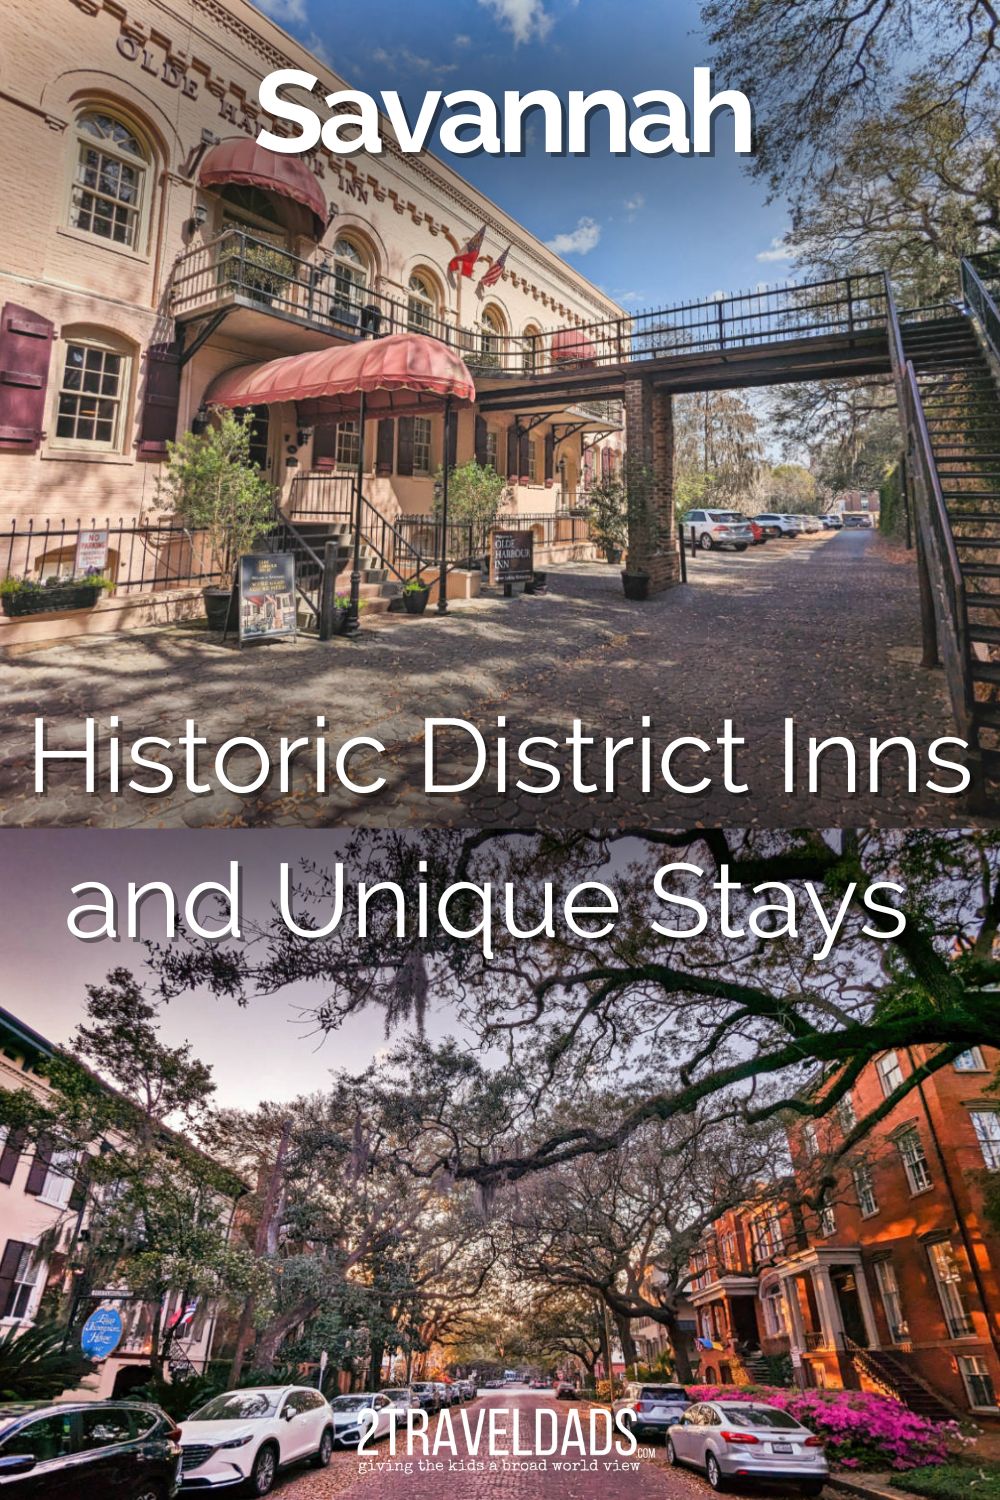 If you're unsure where to stay in Savannah, this guide to inns and hotels in the Historic and Victorian Districts will help you choose a great place for your visit. Top picks of historic hotels and charming inns in Savannah, Georgia.